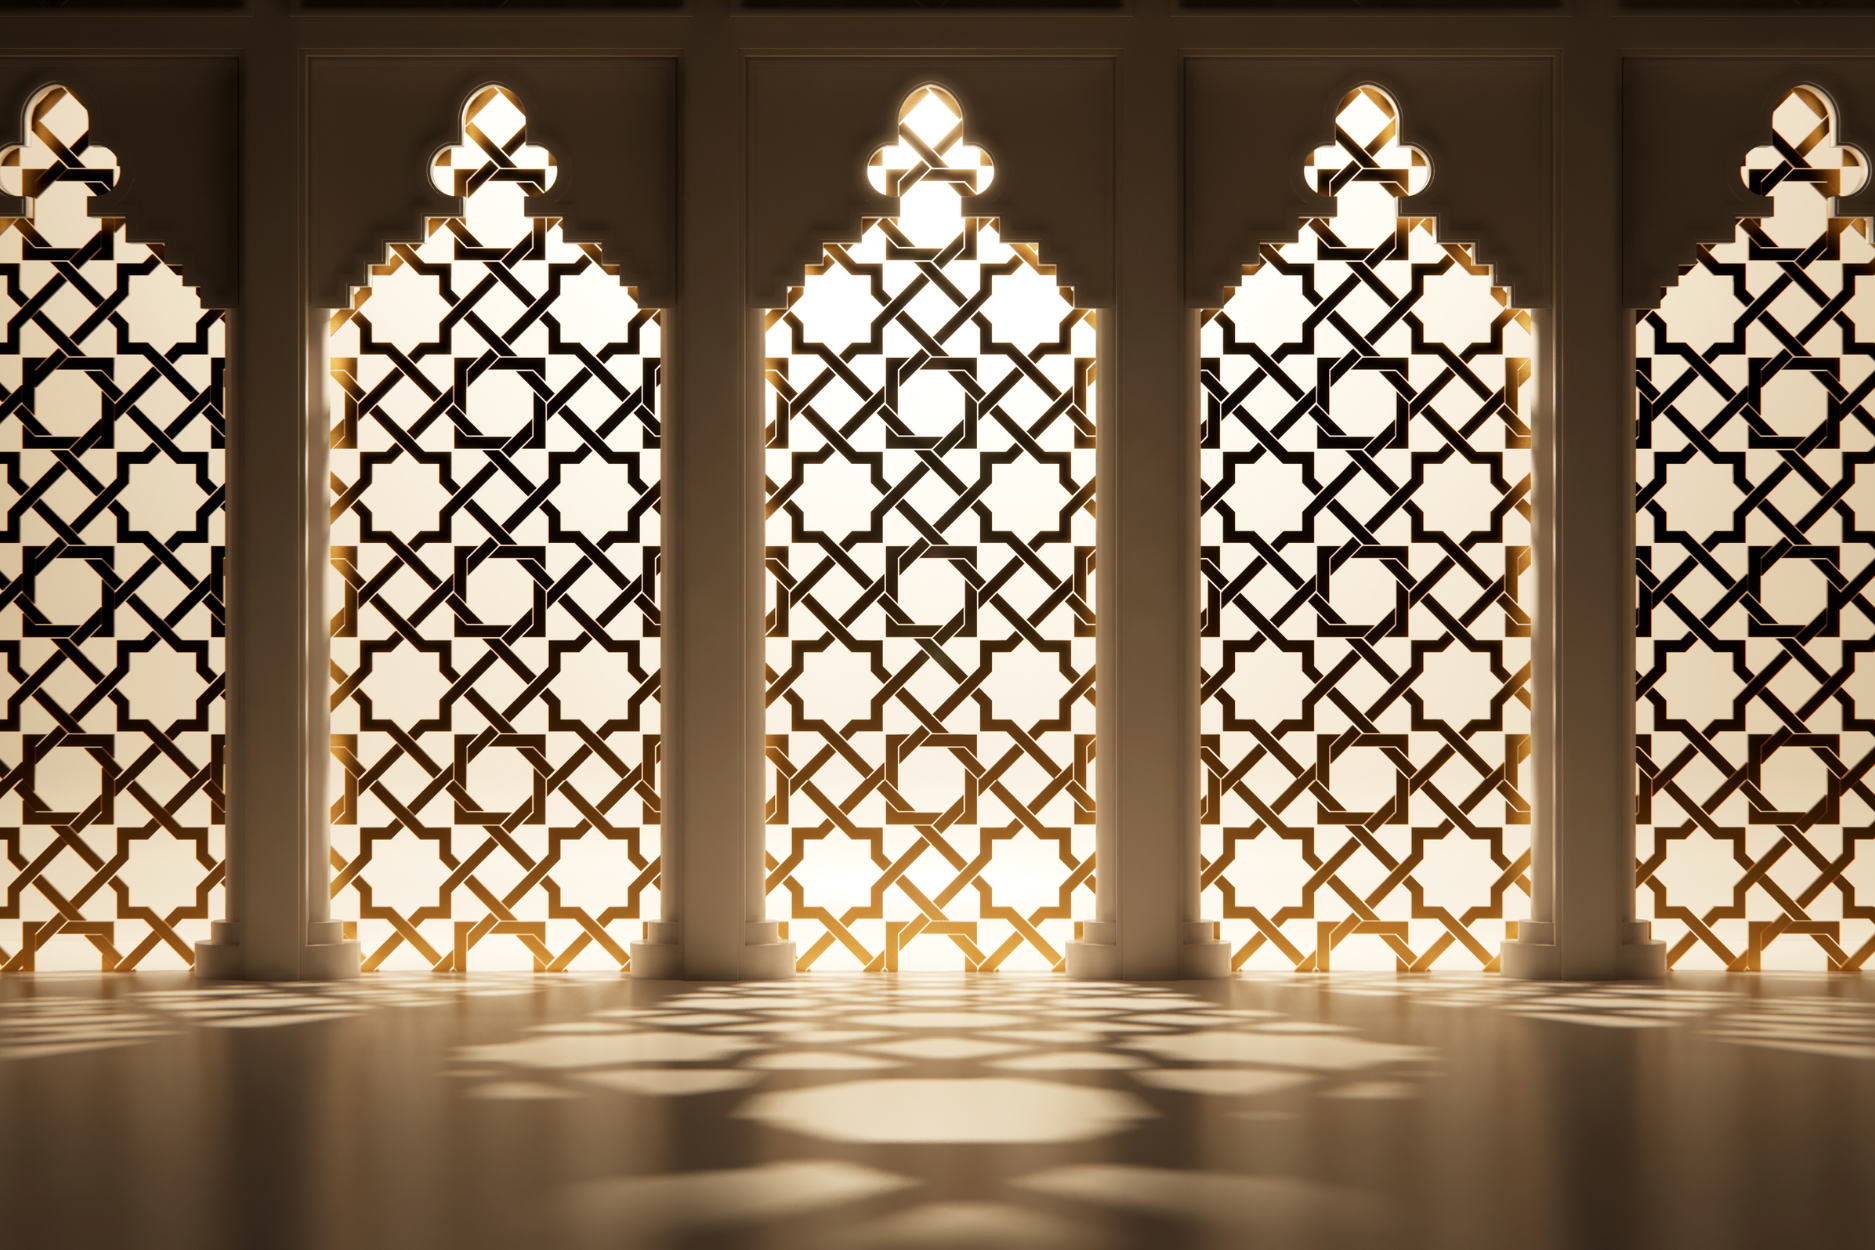 Islamic architecture geometric patterned windows with light shining through